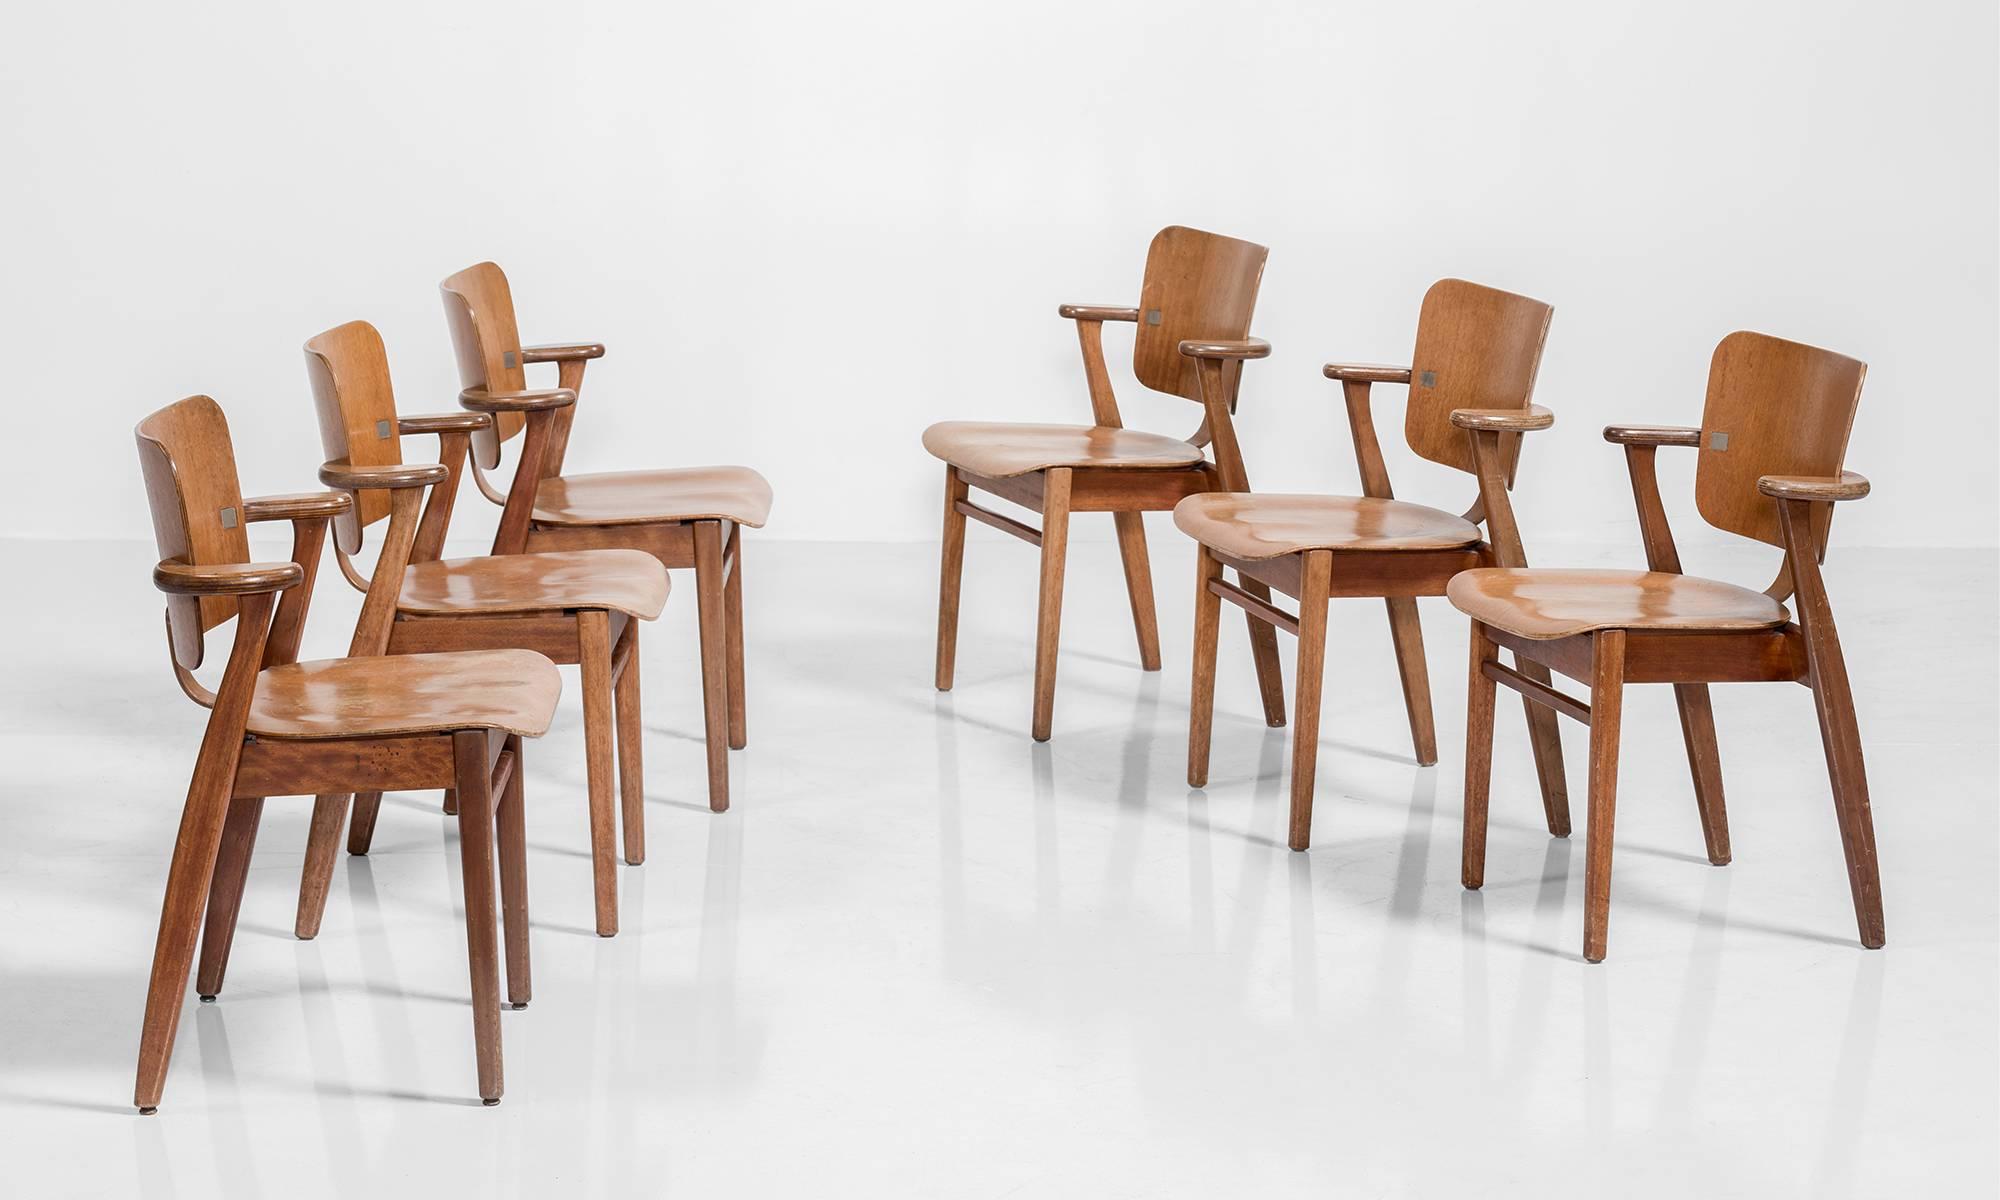 Wooden stacking chairs designed by Ilmari Tapiovaara, produced in 1953 by Keravan Puuteollisuus of Finland for U.S. distribution by Knoll.

Finland, circa 1953.